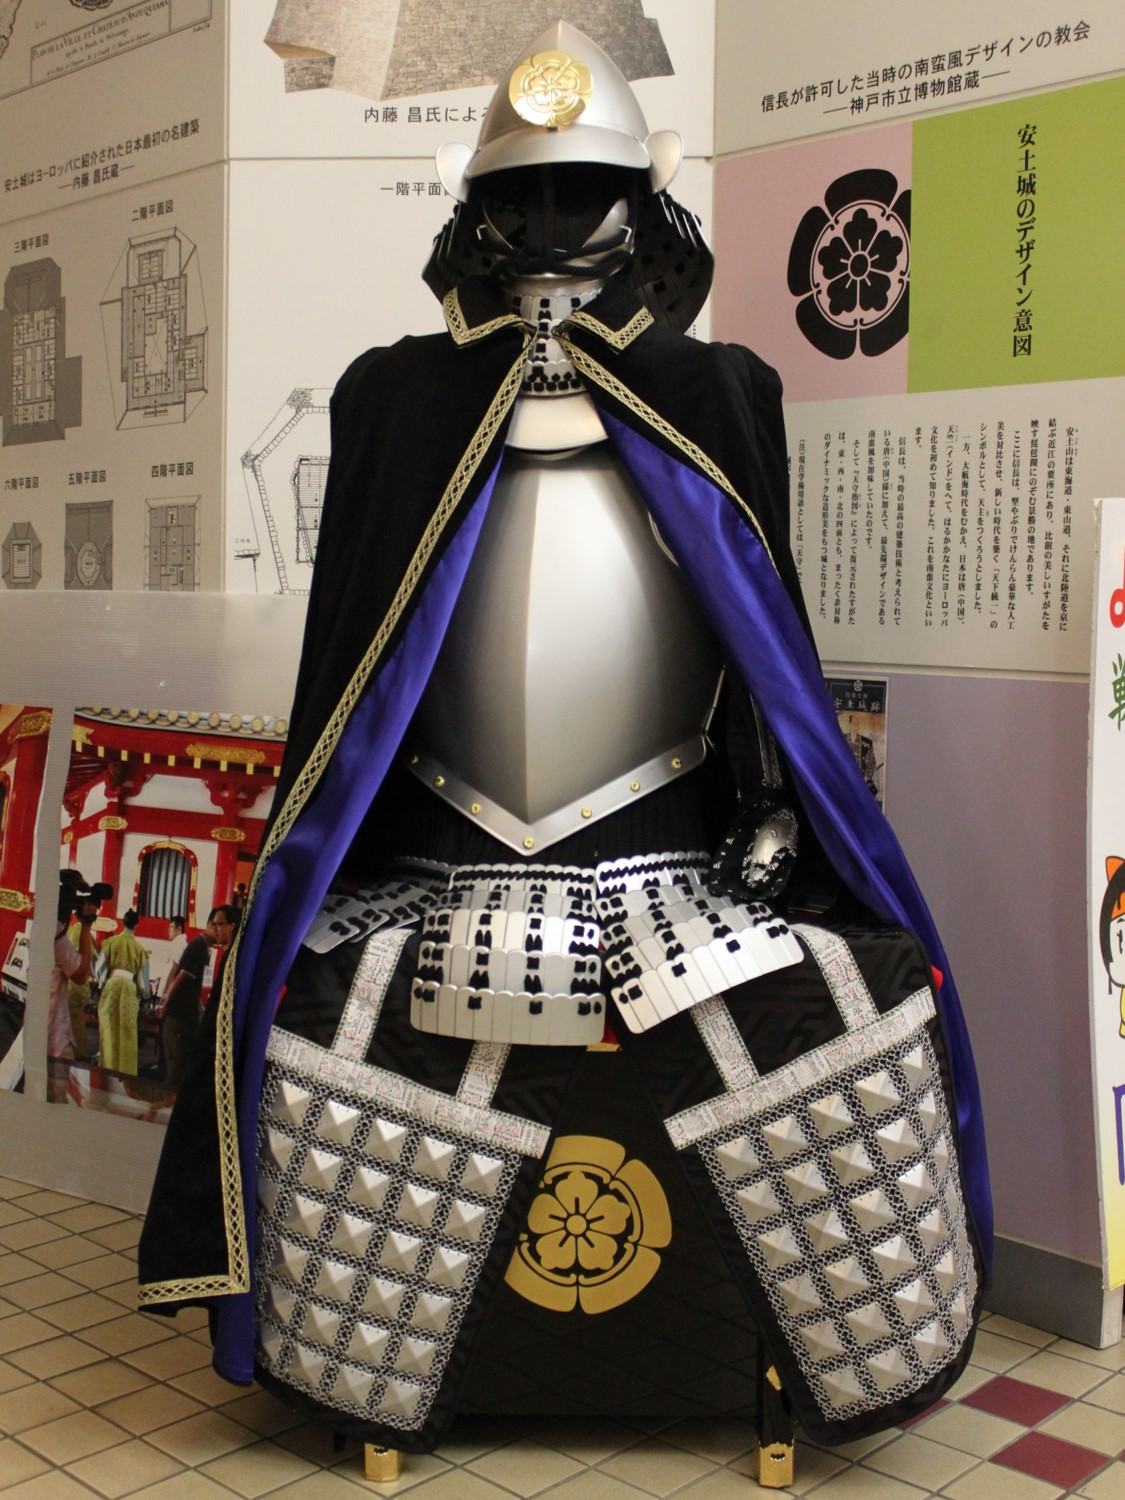 Walking in the footsteps of Lord Oda Nobunaga (armor dressing experience)